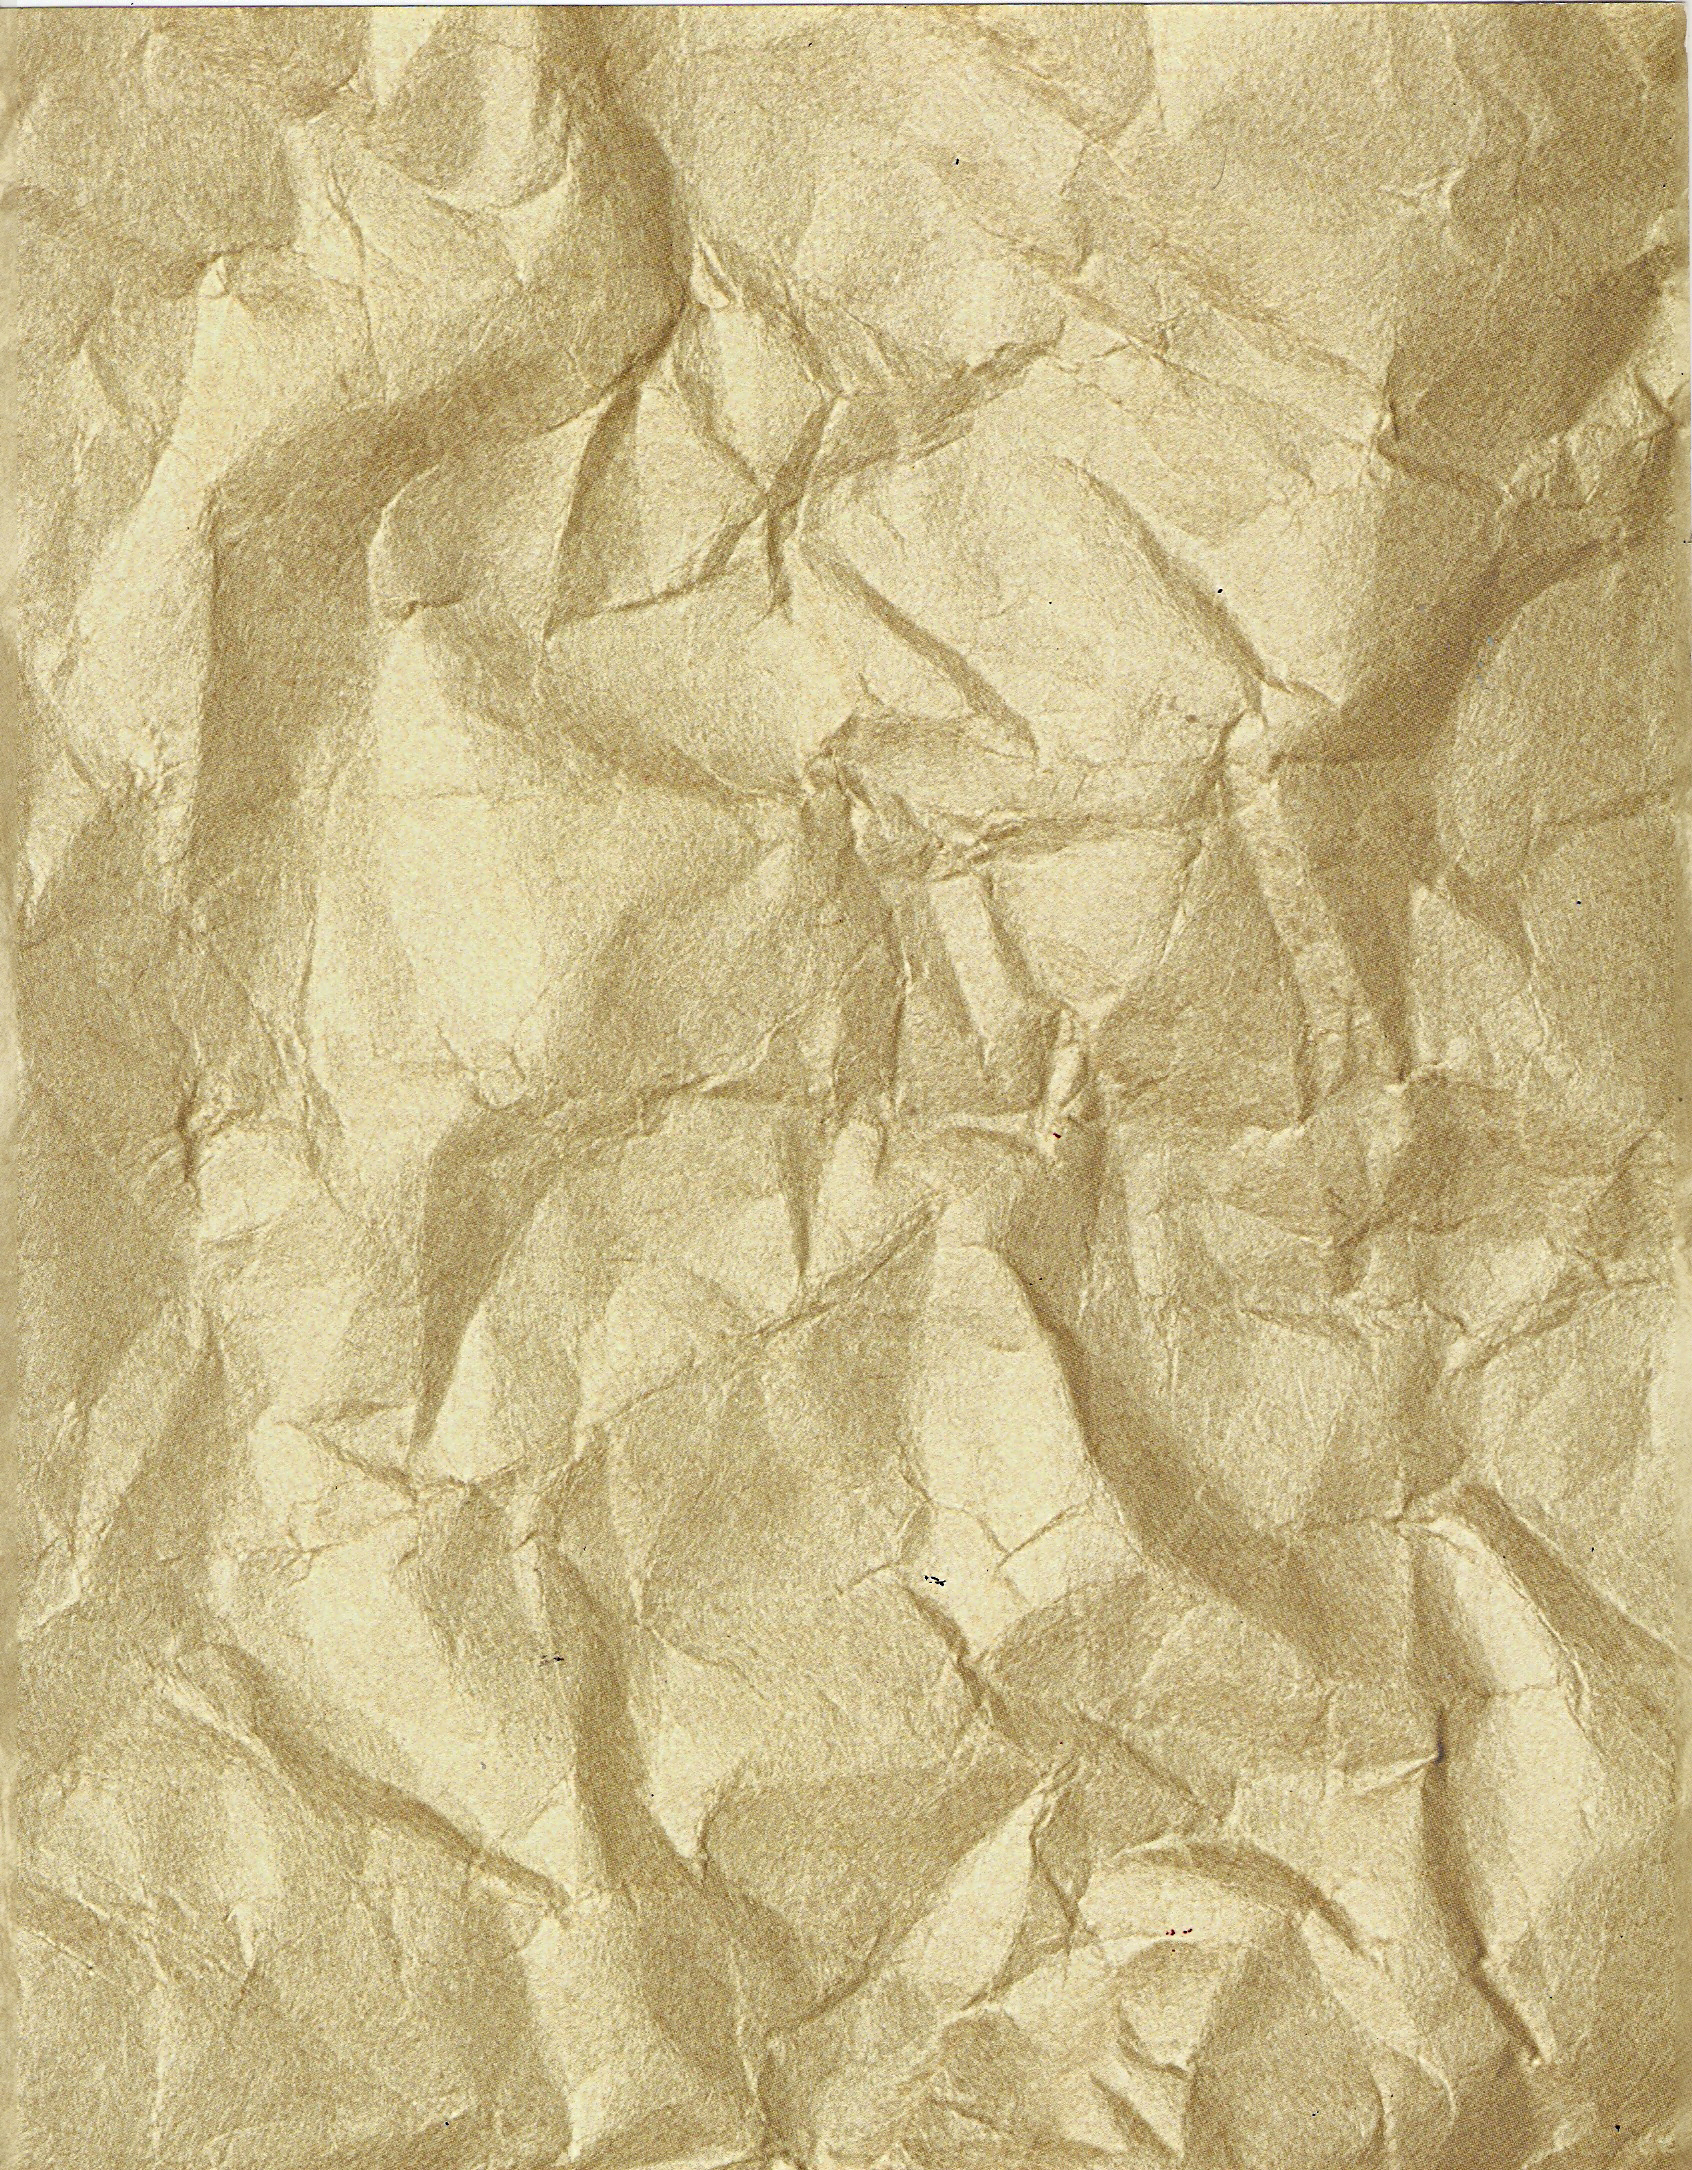 old creased paper texture background